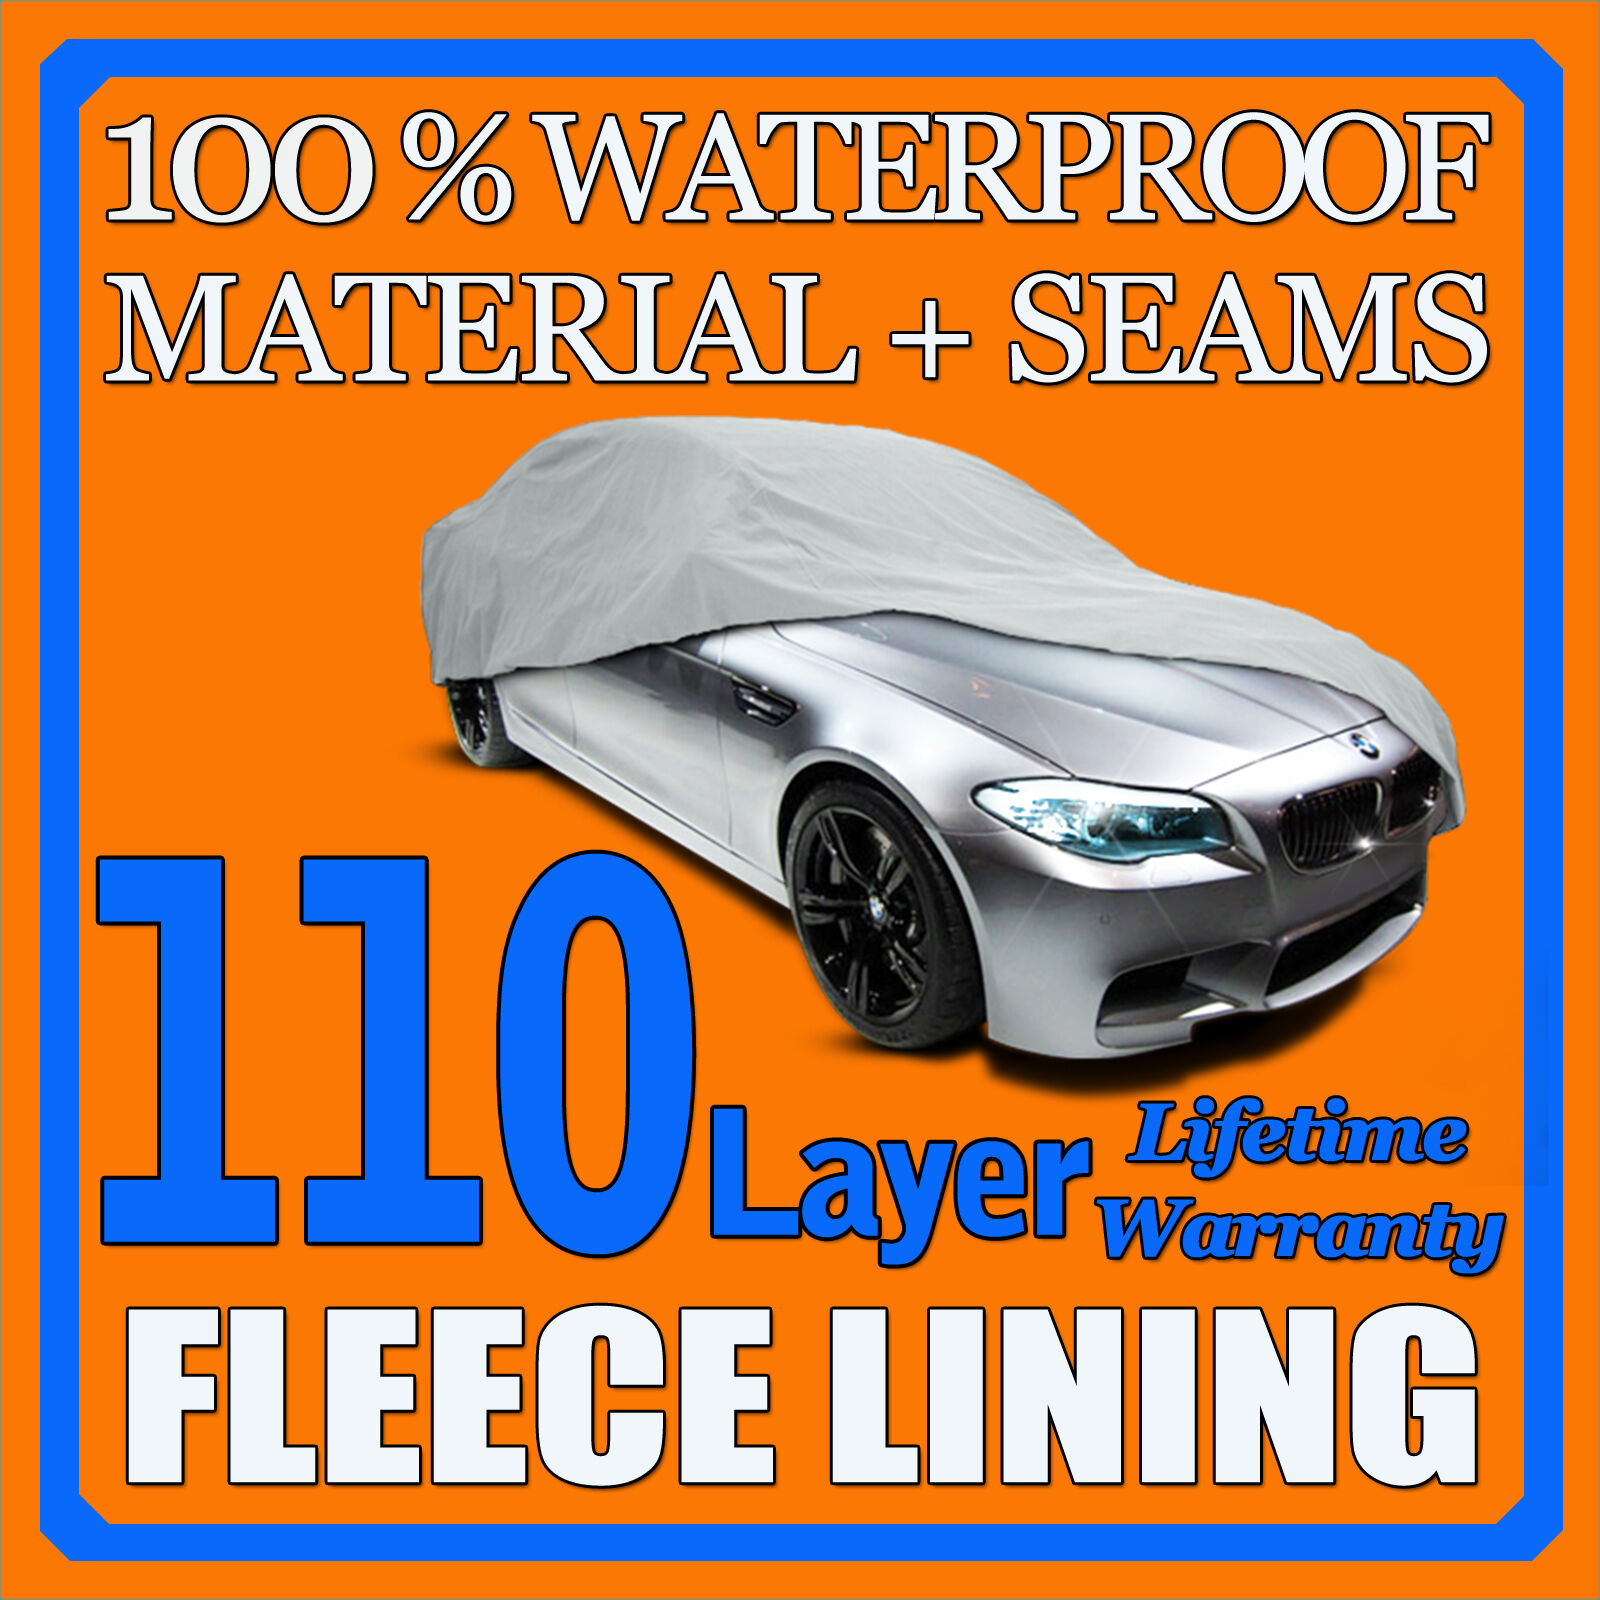 110 Layer Car Cover Outdoor Waterproof Scratchproof Breathable 60 70 80 90 100 K